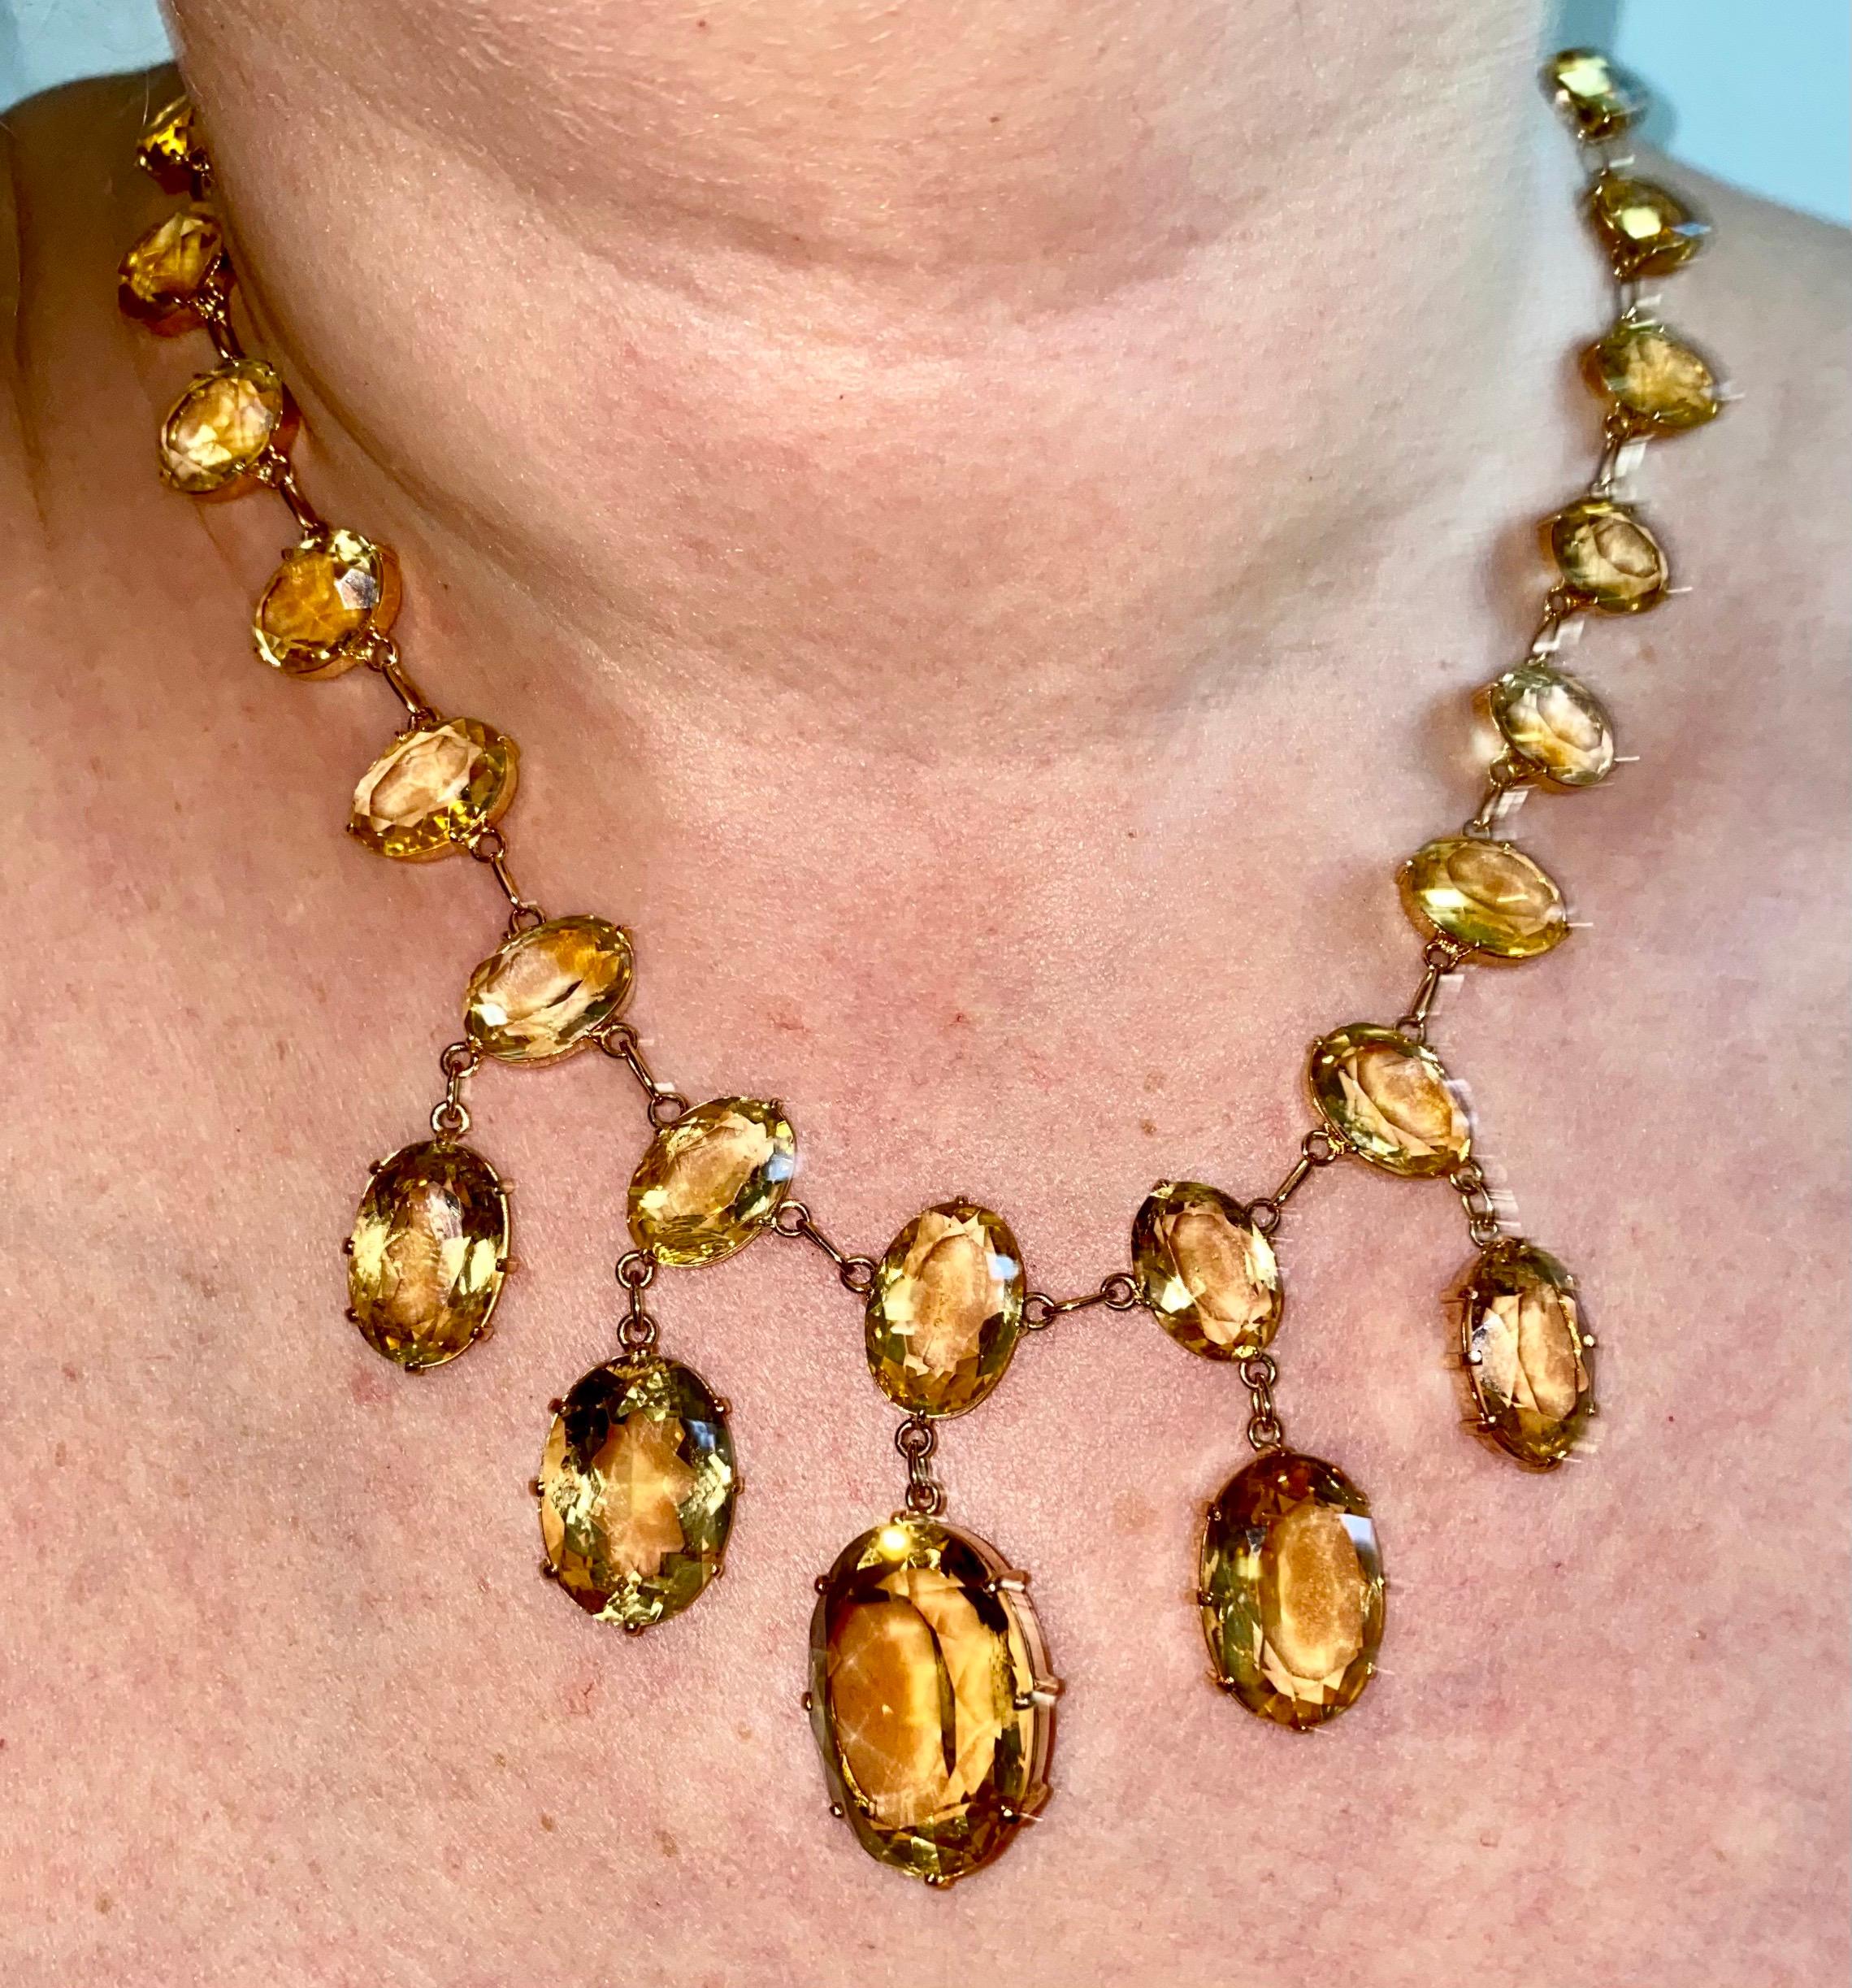 A superb quality mid Antique Riviere Necklace. This is hand crafted using Solid 15 carat yellow gold. Brilliantly Designed with 29 natural oval cut citrine stones in a claw setting. The Largest 5 graduated faceted oval lemon colour citrines are in 3